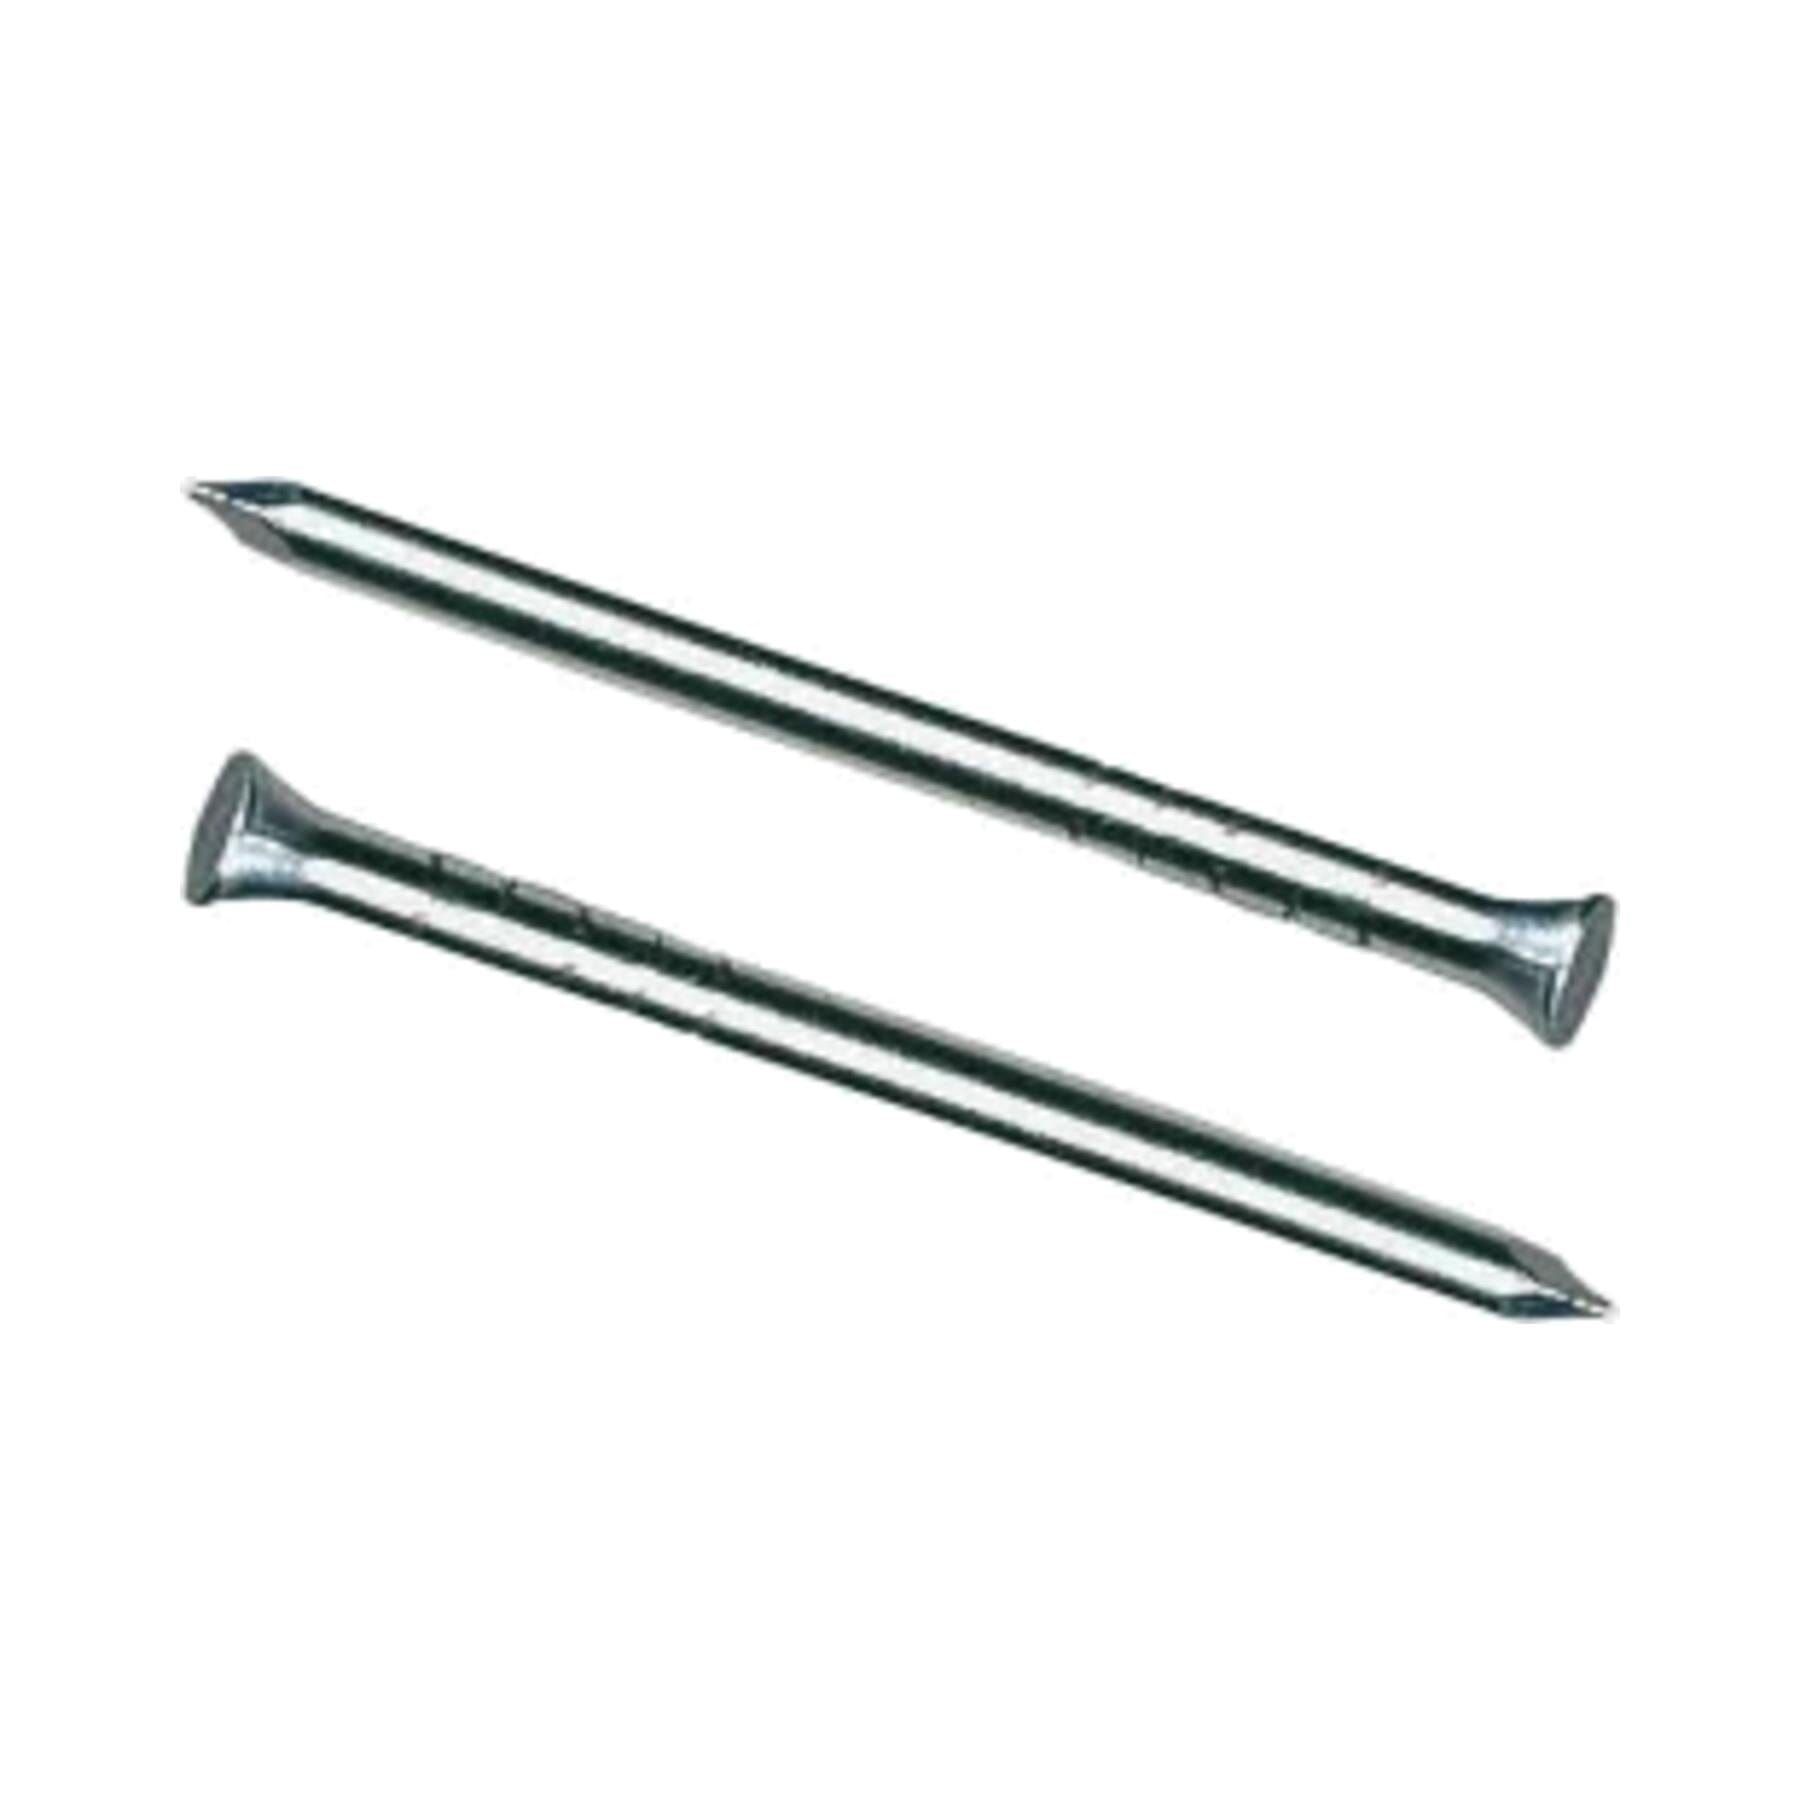 Home Hardware 25mm Steel Panel Pins 250g Pins | Snape & Sons